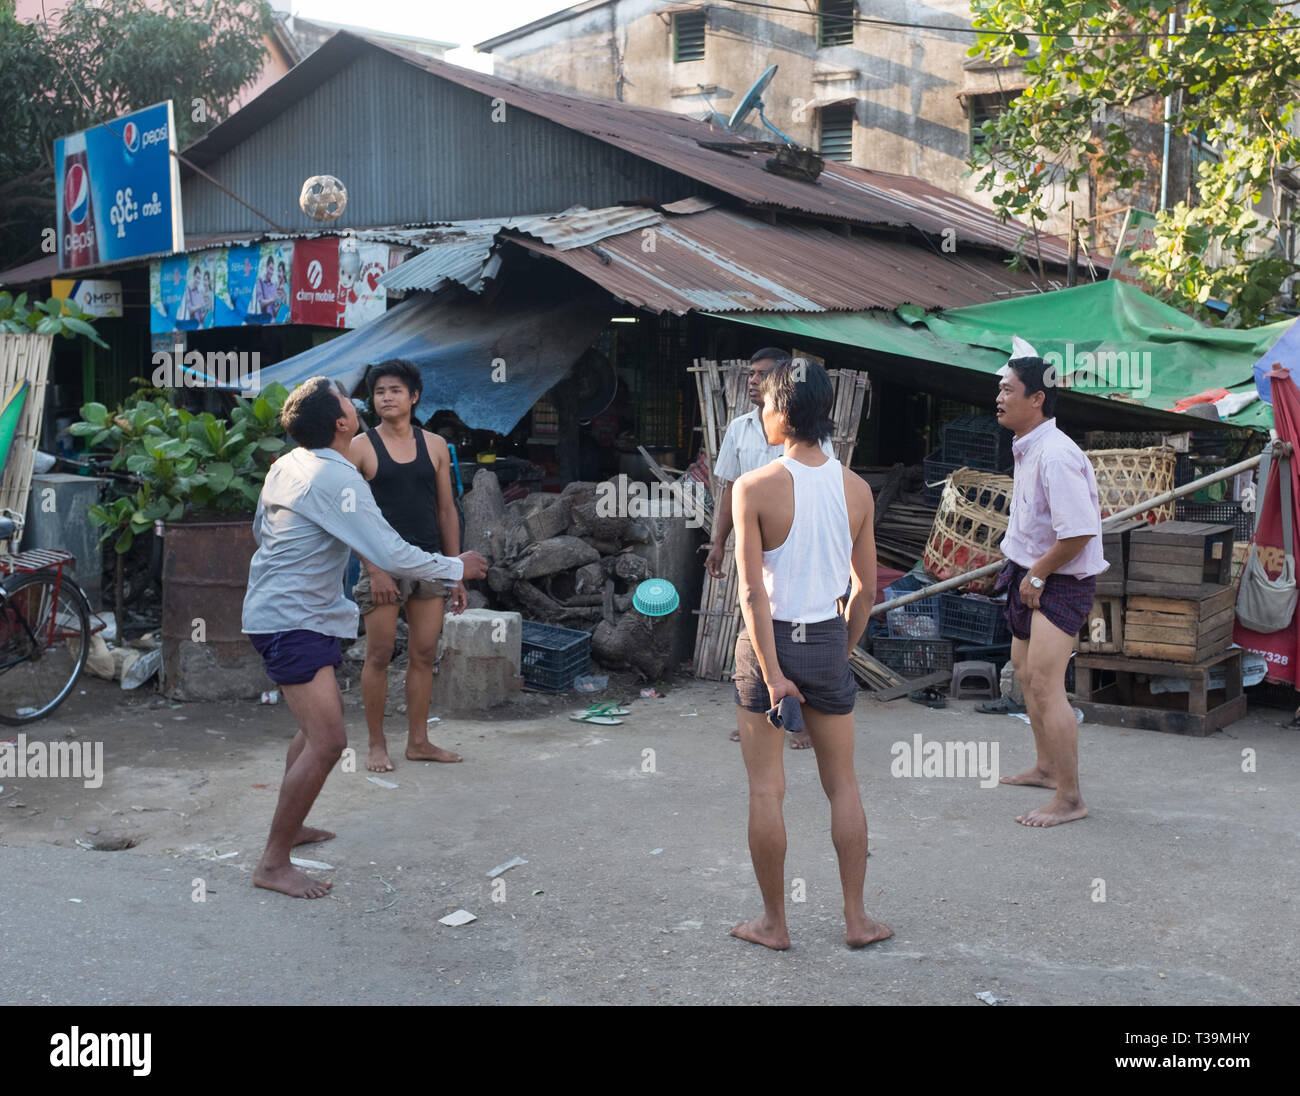 Men playing Chinlone also known as caneball, is the traditional, national sport of Myanmar (Burma). It is non-competitive, with typically six people p Stock Photo